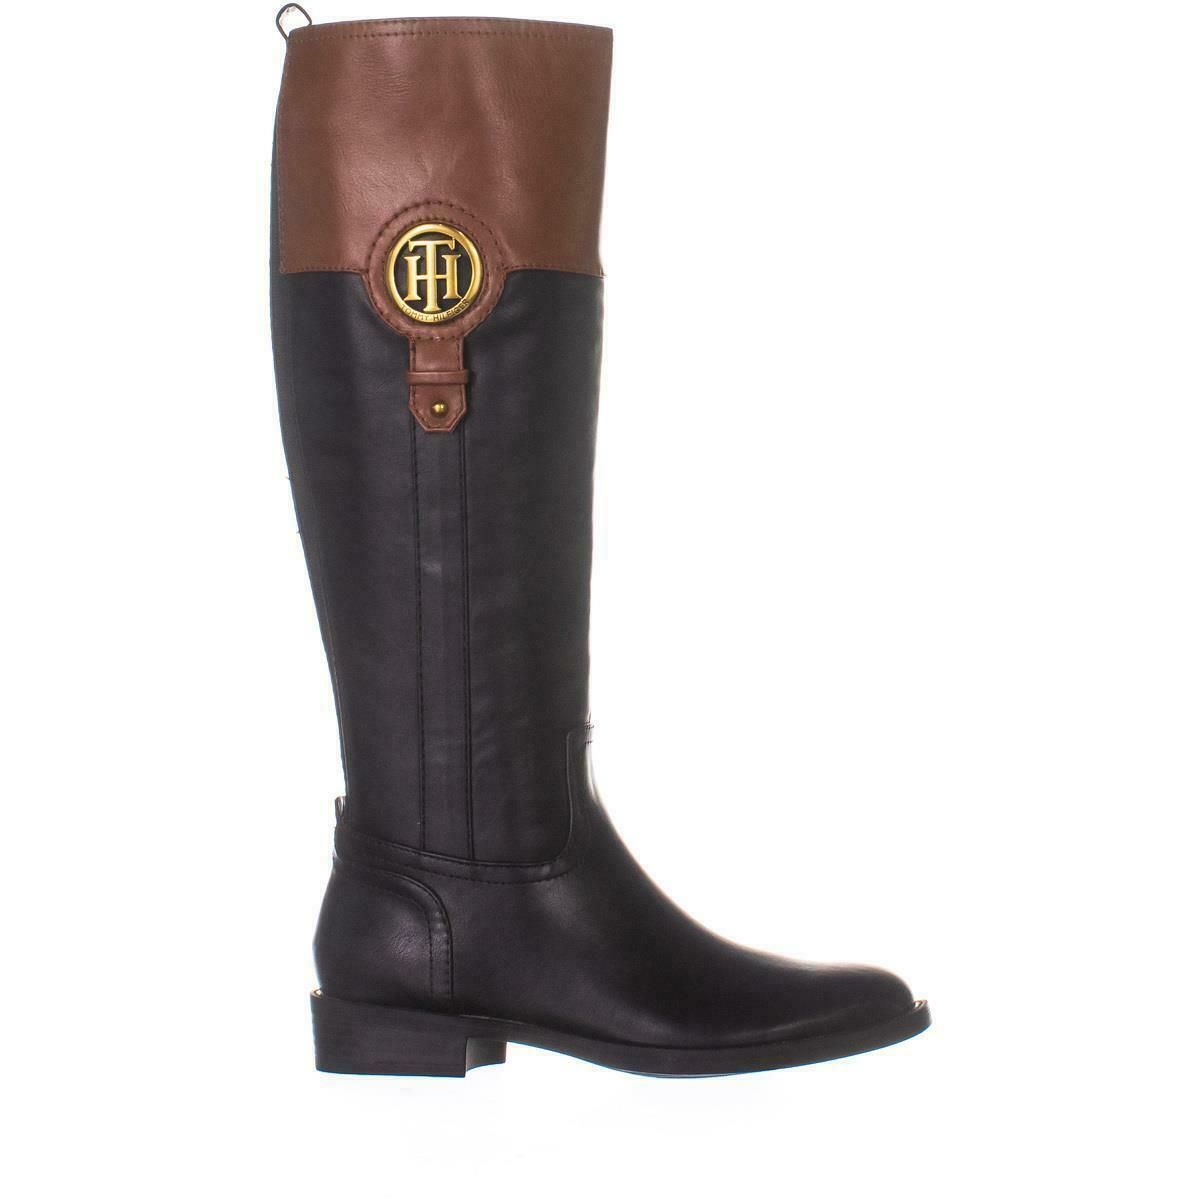 Tommy Hilfiger Ilia4 Knee High Riding Boots, Black Multi - Boots